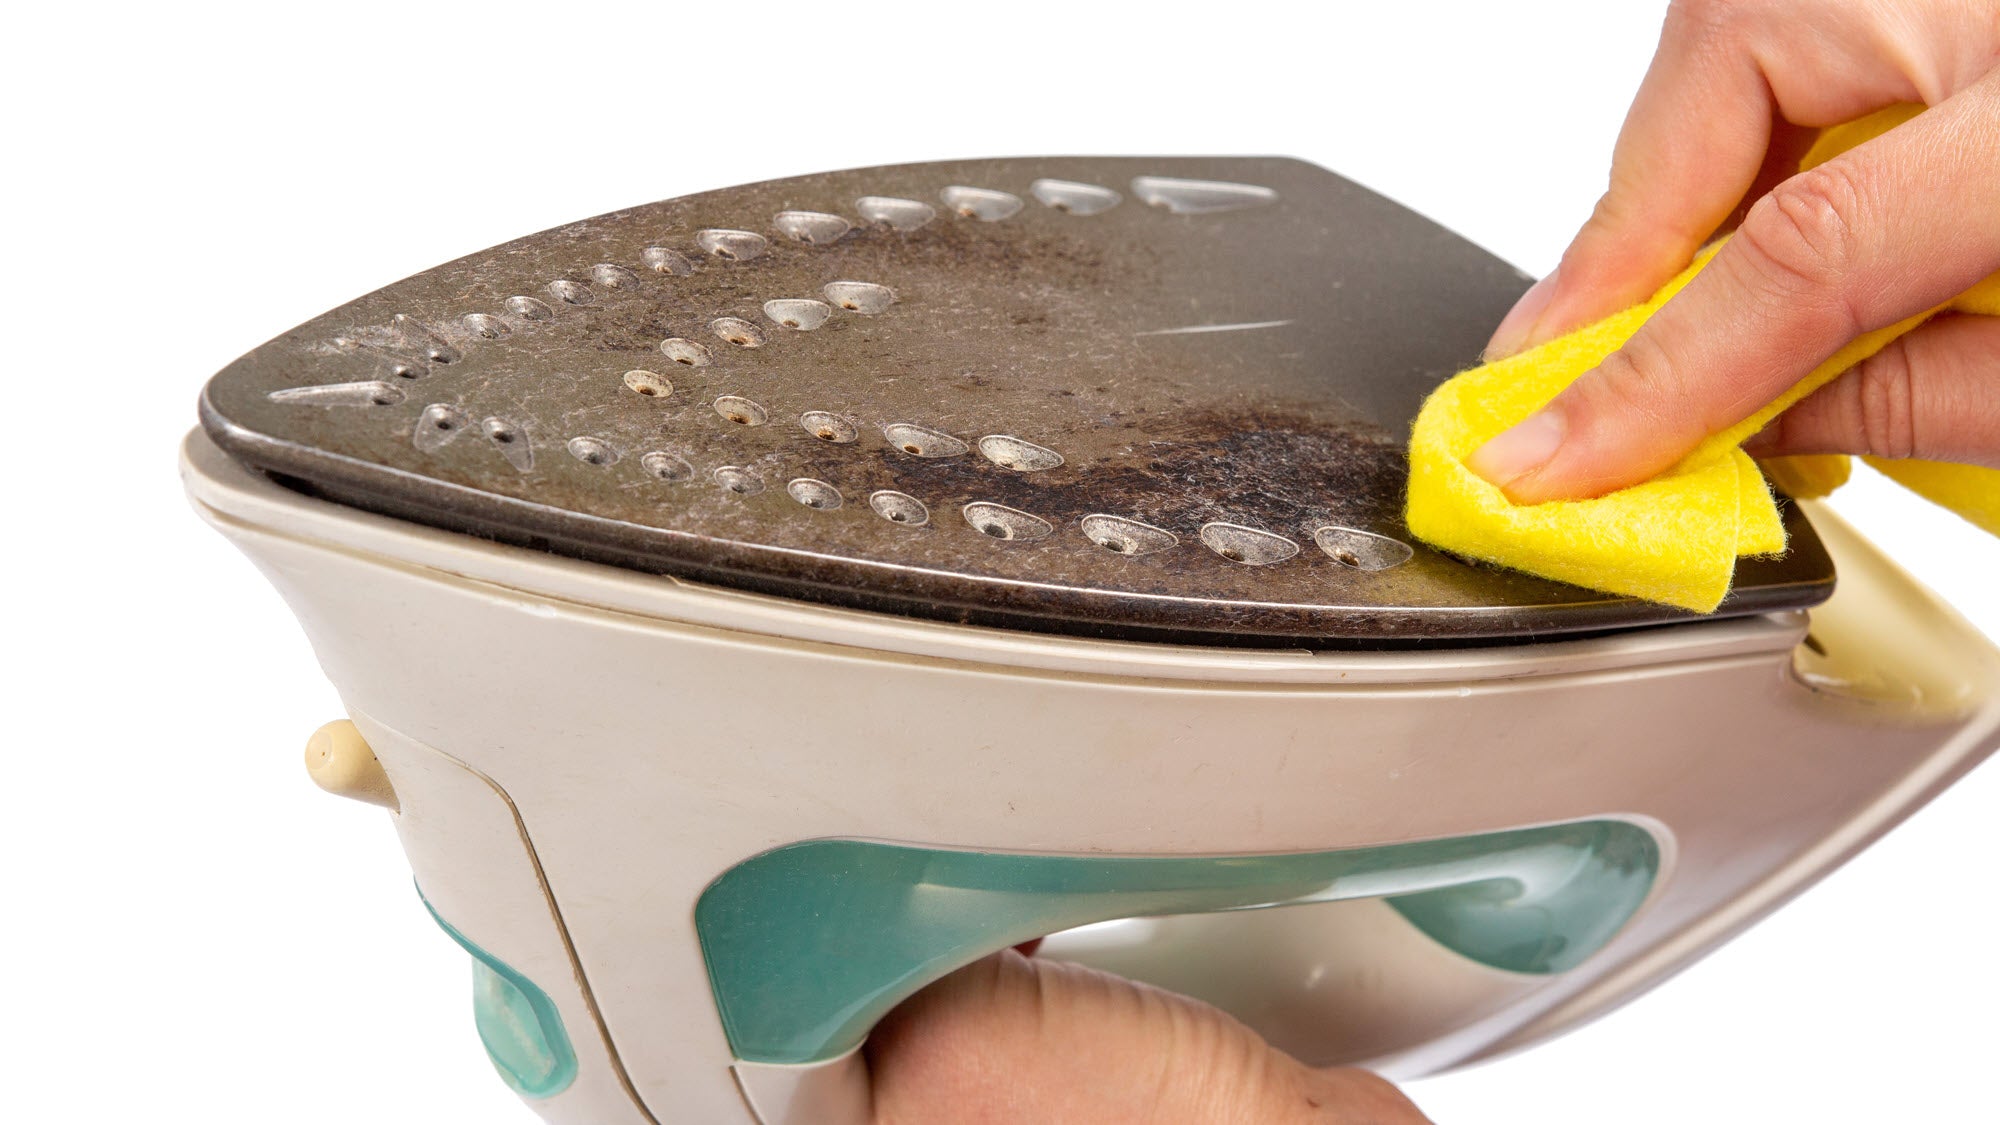 How to Clean Your Iron: Step-by-Step Instructions